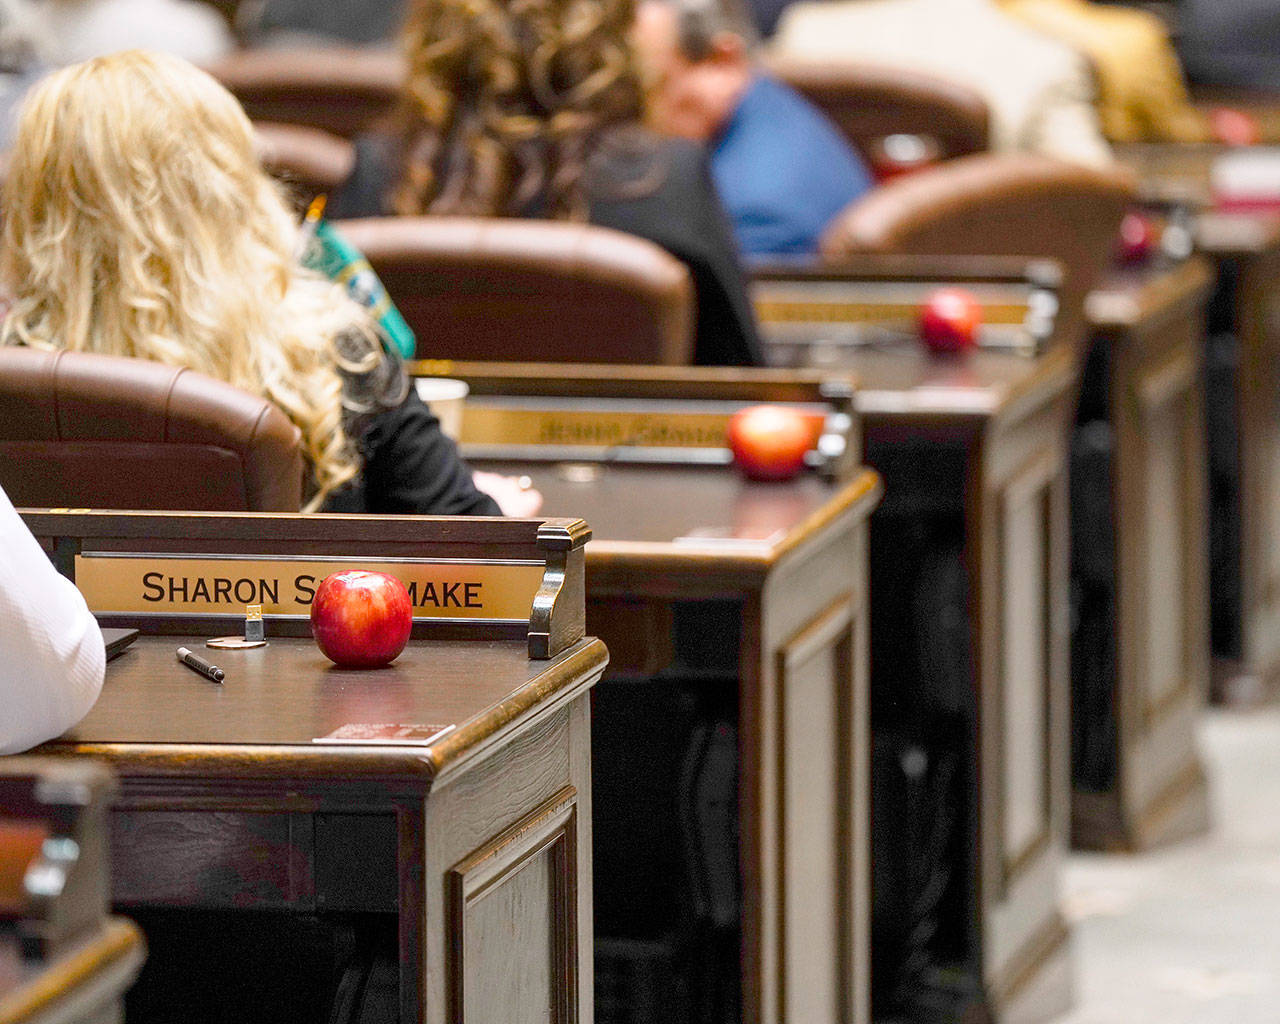 Cosmic Crisp apples were placed on the desk of legislators in Olympia during Gov. Jay Inslee’s State of the State speech Jan. 14. COURTESY PHOTO, Office of the Governor